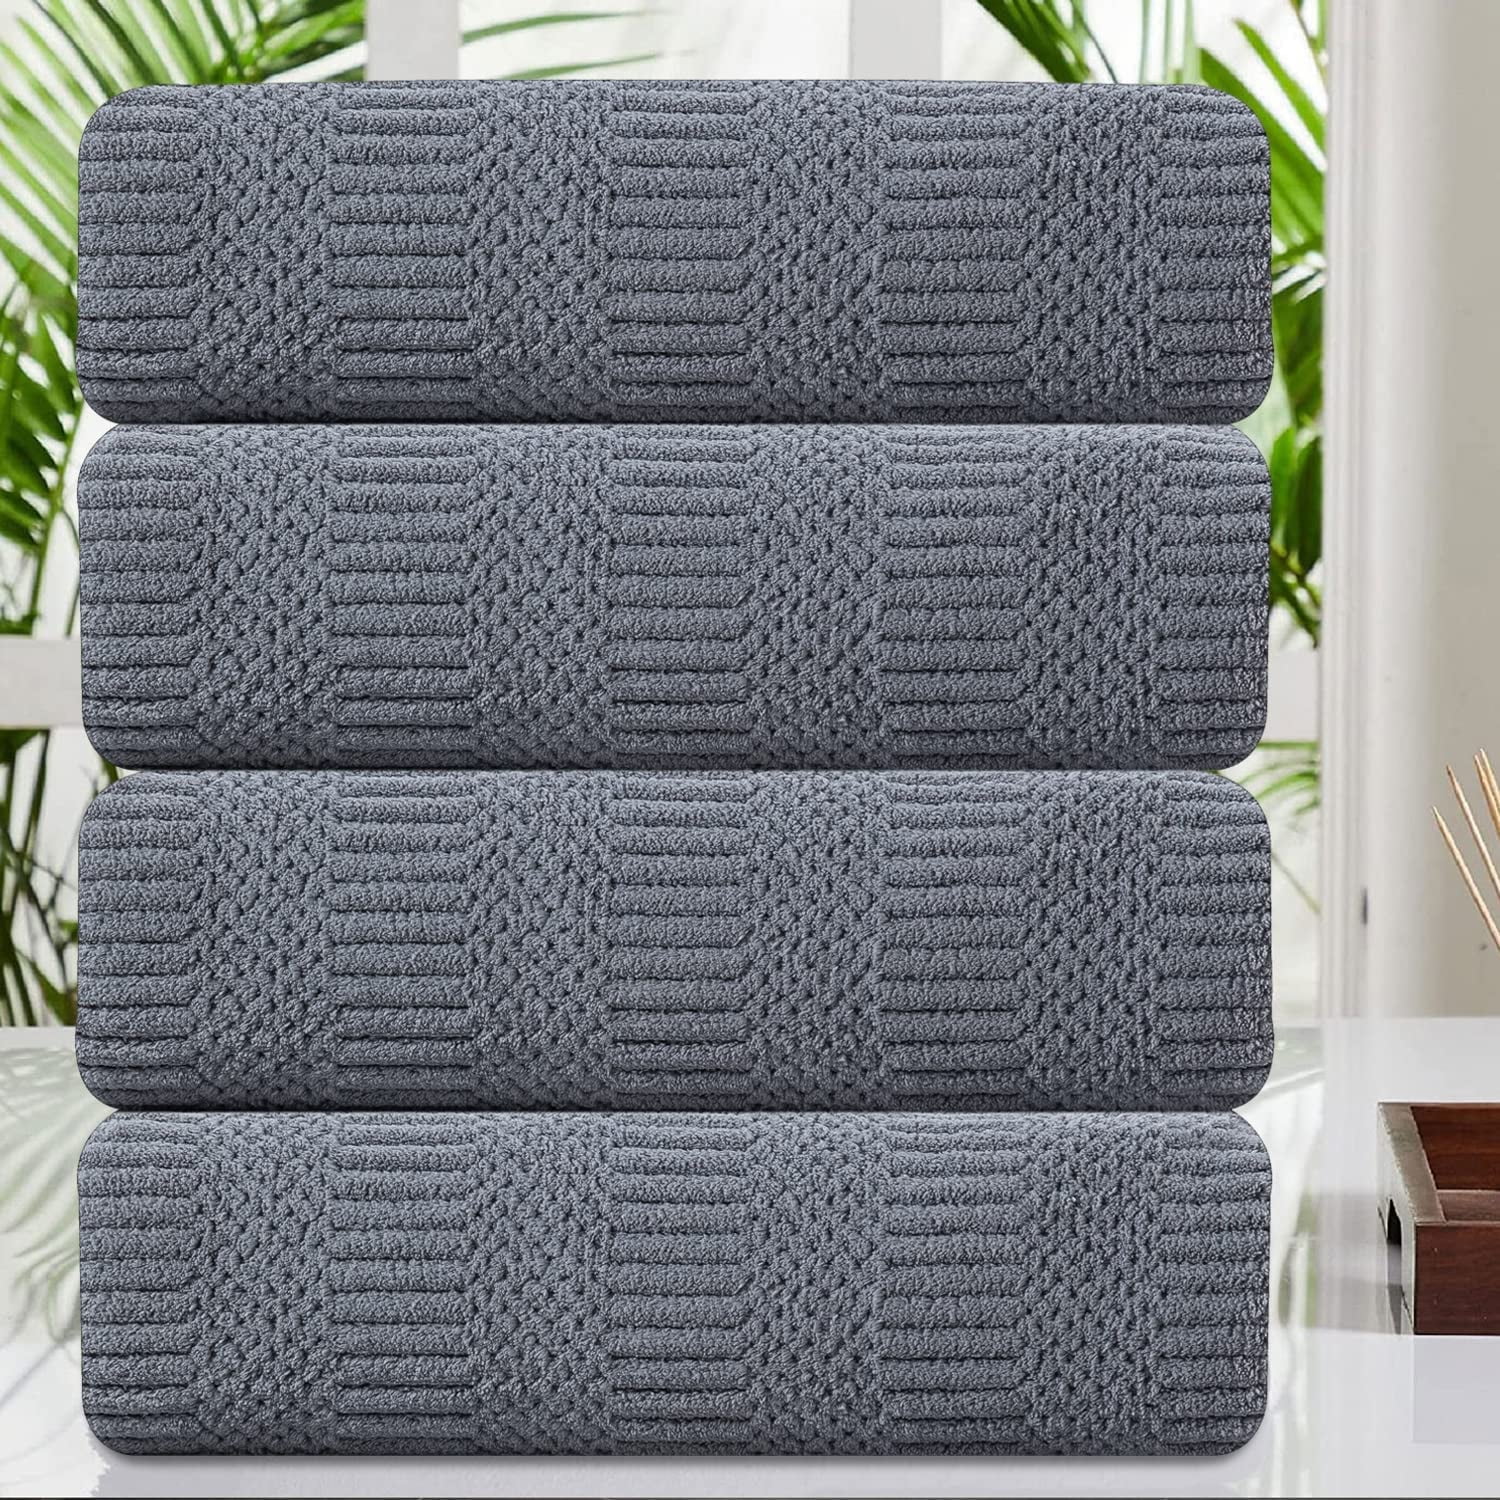  Gray Bath Towels Set,4 Oversized Large Bath Towels Sheet,4 Anti  Frizz Hair Towel Wrap-600 GSM Oversized Bath Sheet,Extra Large Microfiber -  Quick Dry,Highly Absorbent,Super Soft Bathroom Towel Set : Home 